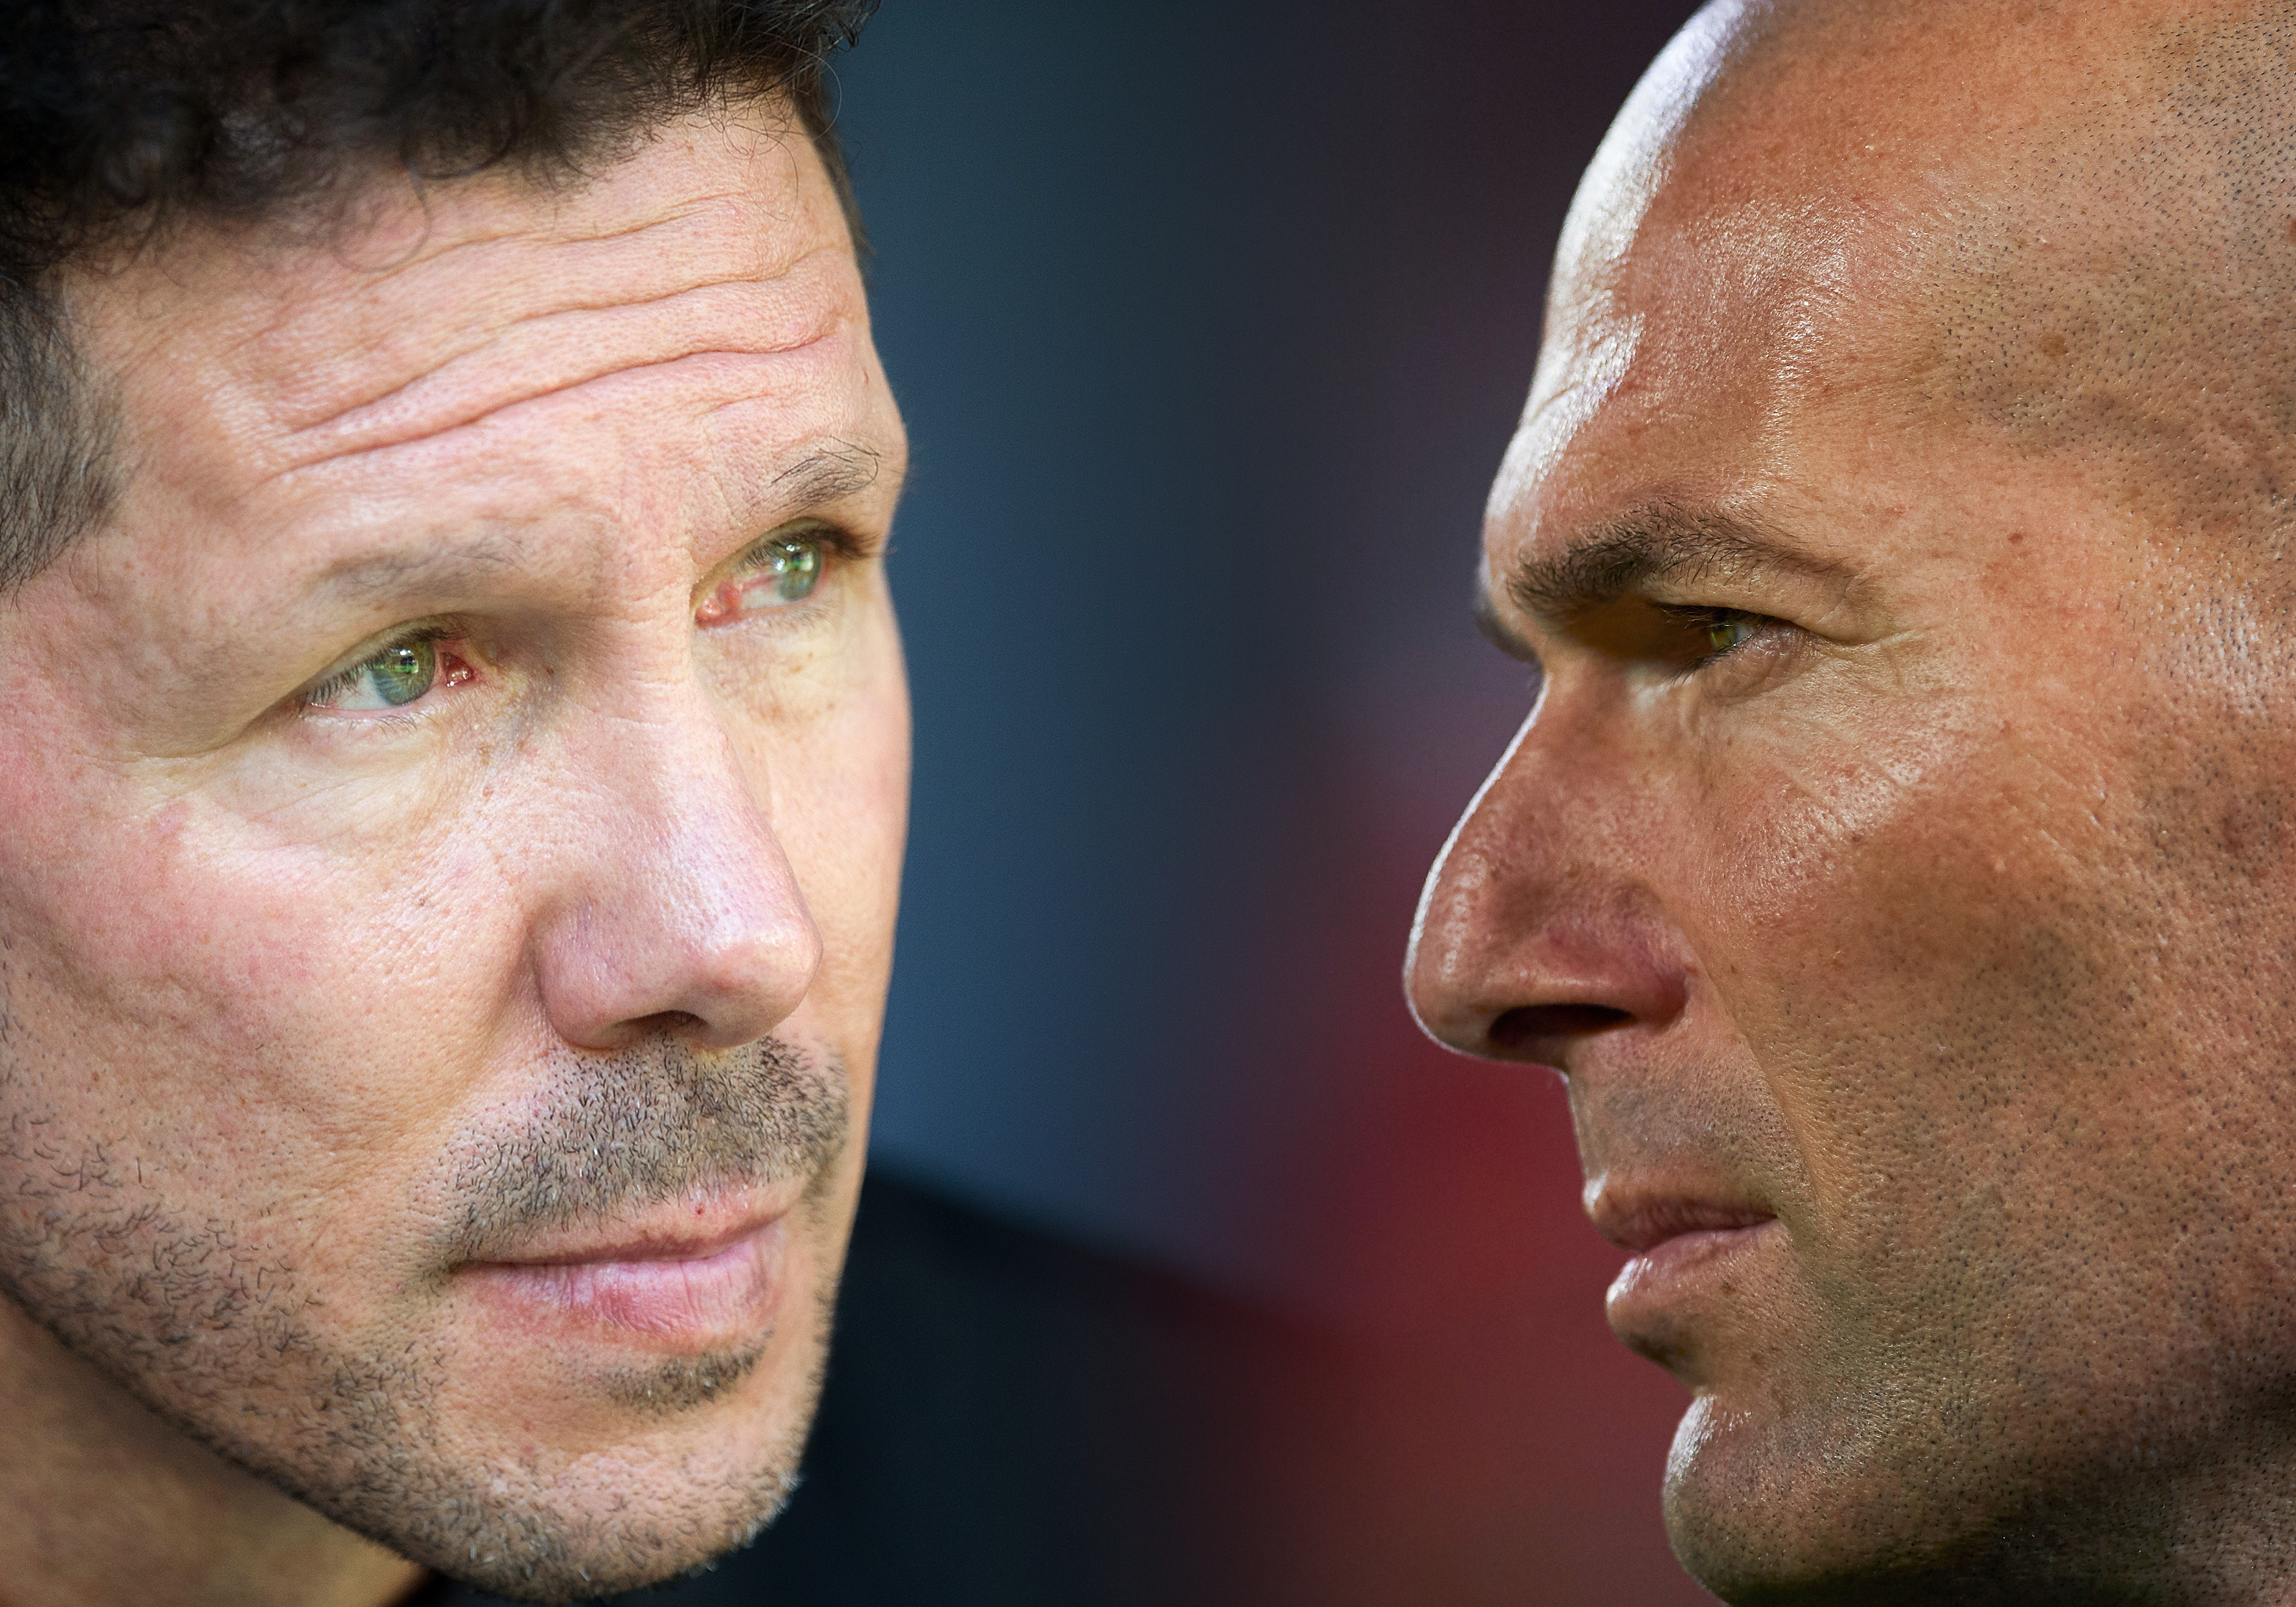 FILE PHOTO (EDITORS NOTE: COMPOSITE OF IMAGES - Image numbers 852372342,956612460 - GRADIENT ADDED) In this composite image a comparison has been made between Manager Diego Simeone of Club Atletico de Madrid (L) and Head coach Zinedine Zidane of Real Madrid. The Madrid derby takes place on September 28, 2019 at the Wanda Metropolitano stadium in Madrid,Spain.  ***LEFT IMAGE*** MADRID, SPAIN - SEPTEMBER 23: Manager Diego Simeone of Club Atletico de Madrid looks on during the La Liga match between Atletico Madrid and Sevilla at Wanda Metropolitano on September 23, 2017 in Madrid, Spain. (Photo by Denis Doyle/Getty Images) ***RIGHT IMAGE***  SEVILLE, SPAIN - MAY 09: Head coach Zinedine Zidane of Real Madrid looks on prior to the start the La Liga match between Sevilla FC and Real Madrid at Ramon Sanchez Pizjuan stadium on May 9, 2018 in Seville, Spain. (Photo by Aitor Alcalde/Getty Images)